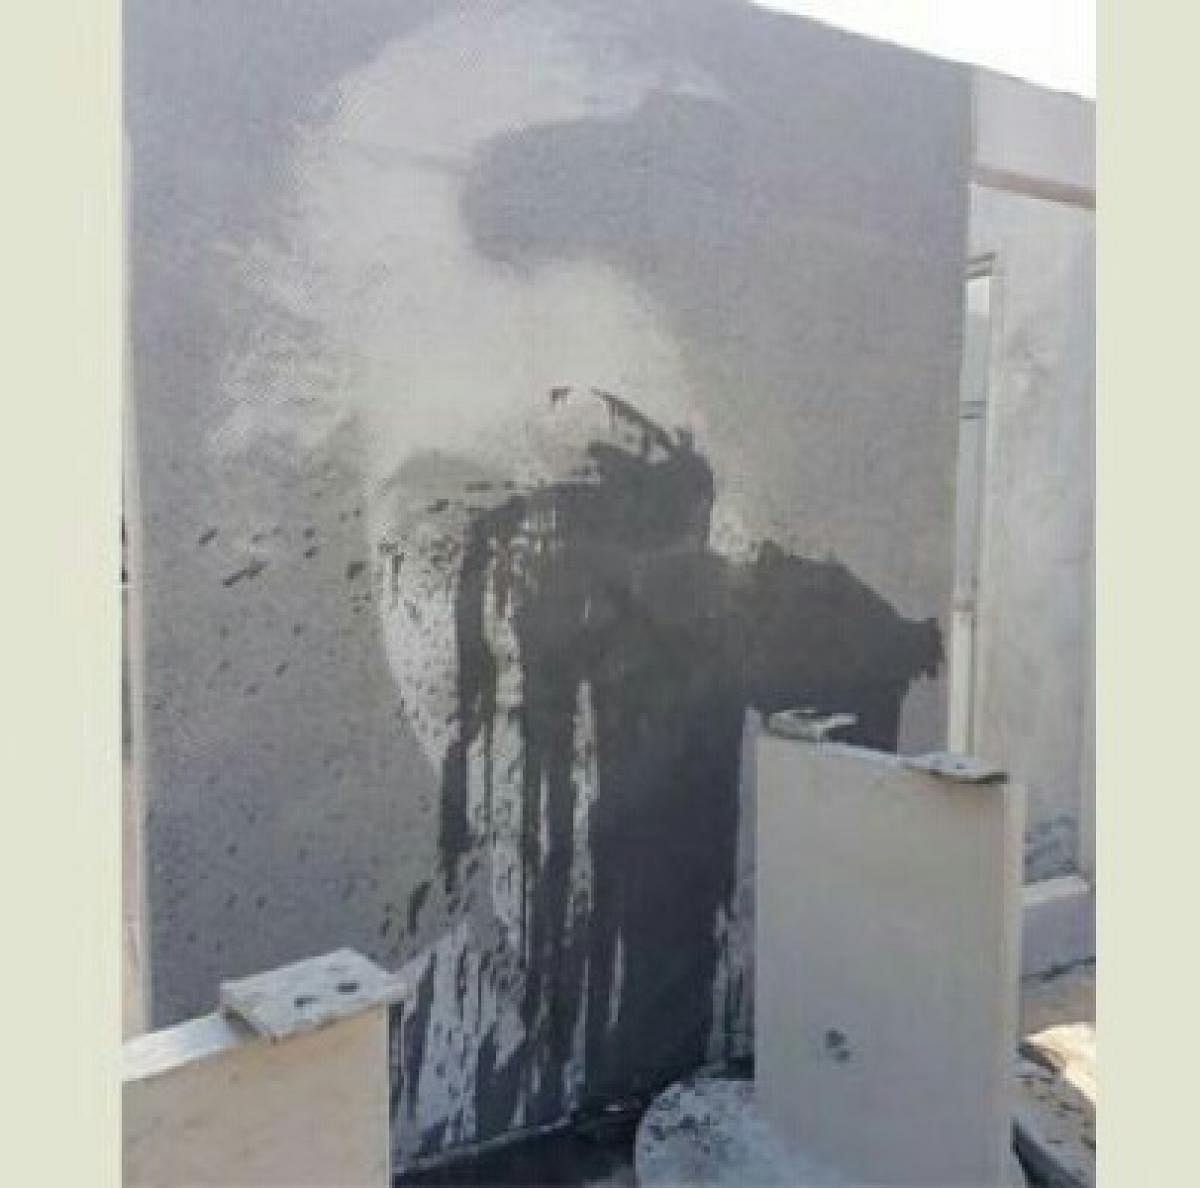 A portrait of former prime minister Indira Gandhi, outside the under-construction Indira Canteen in Suratkal, was smeared with black ink by unidentified persons on Friday night.